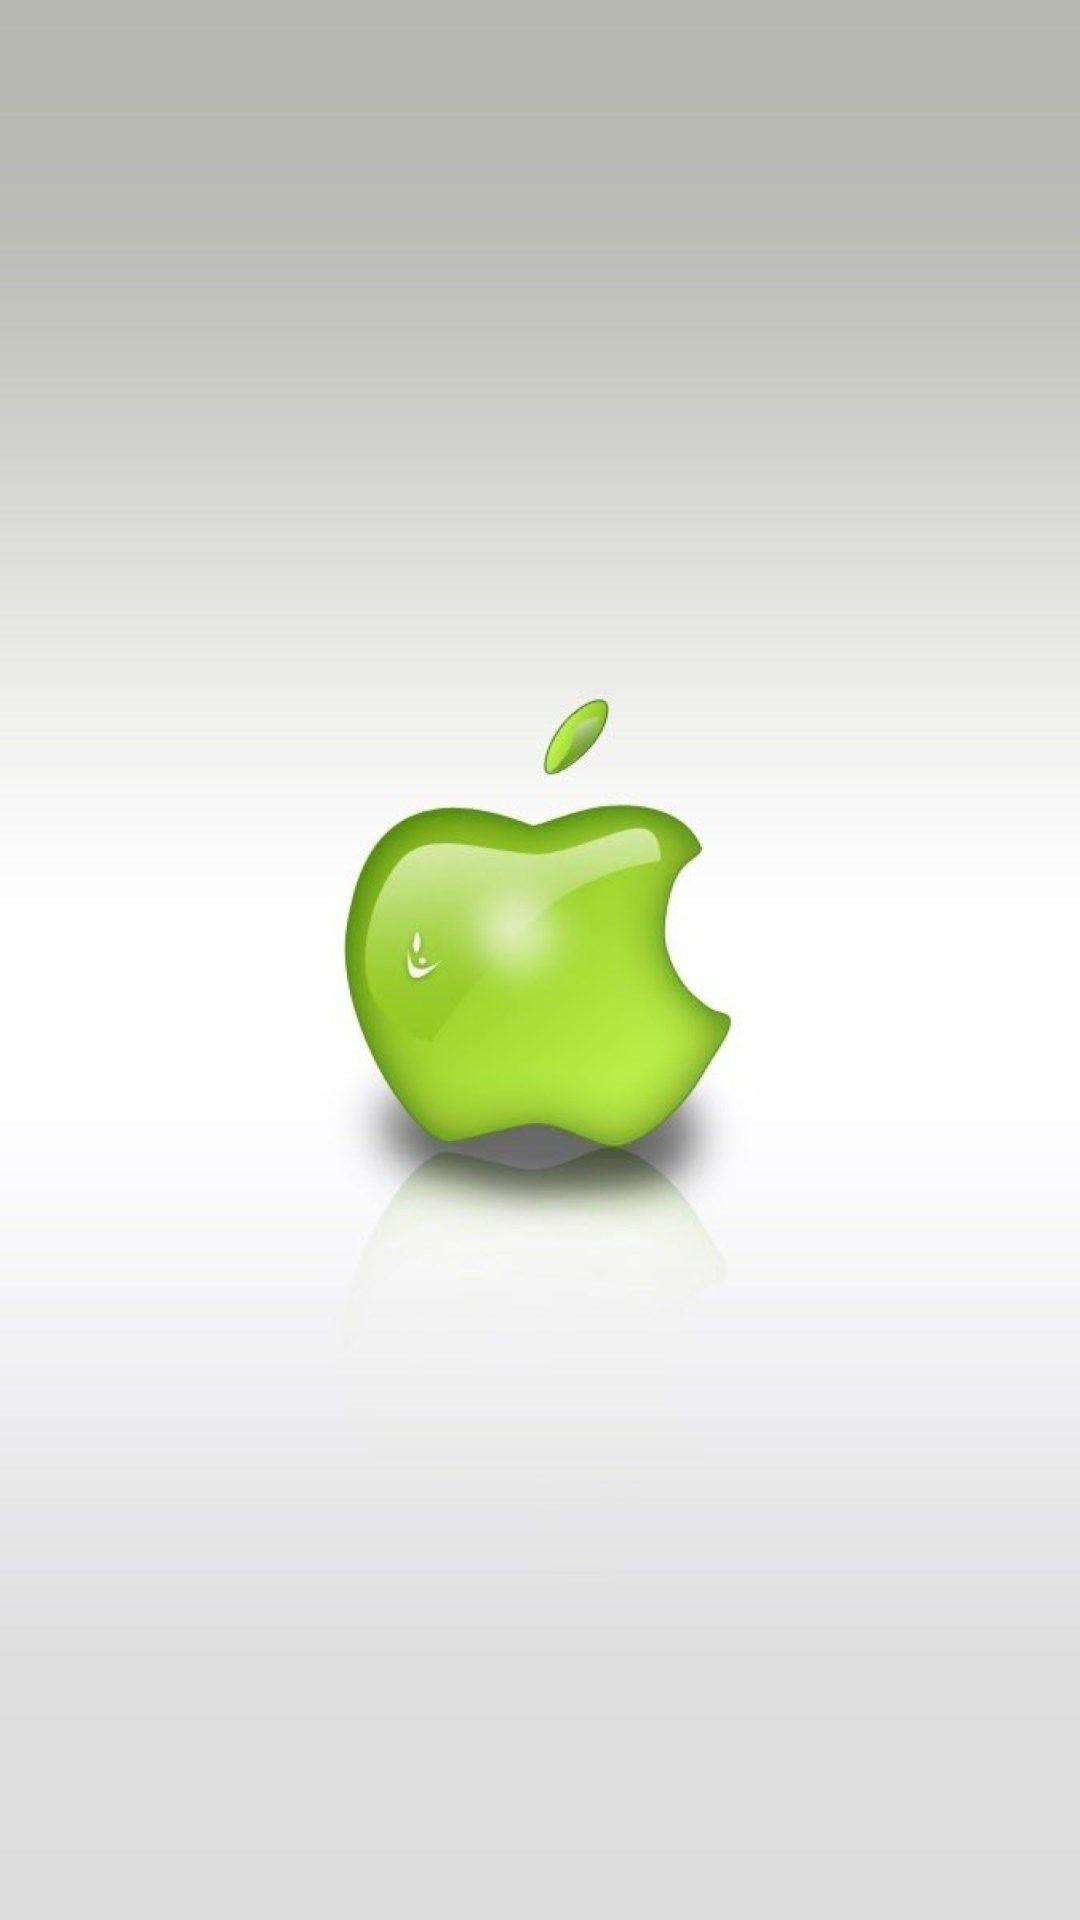 download free green apple logo wallpaper for iphone. Apple